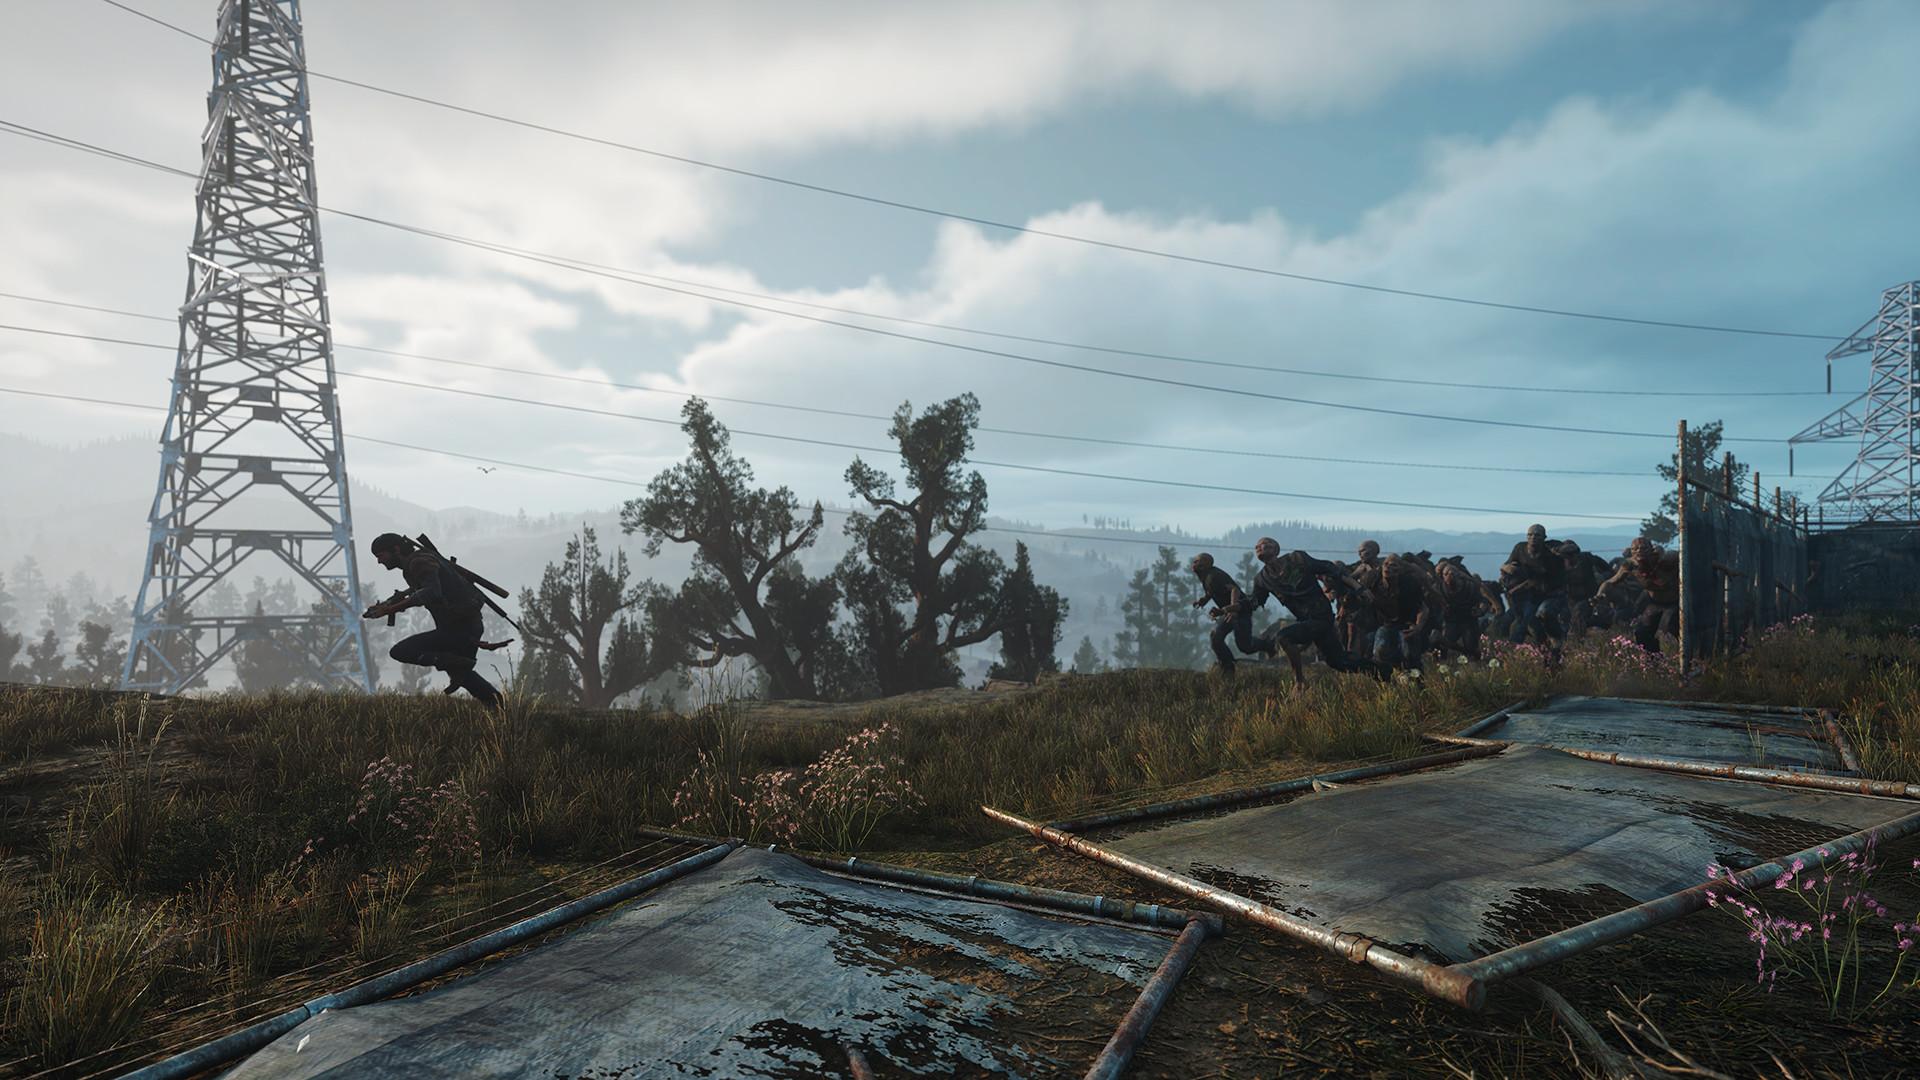 Screenshot №2 from game Days Gone